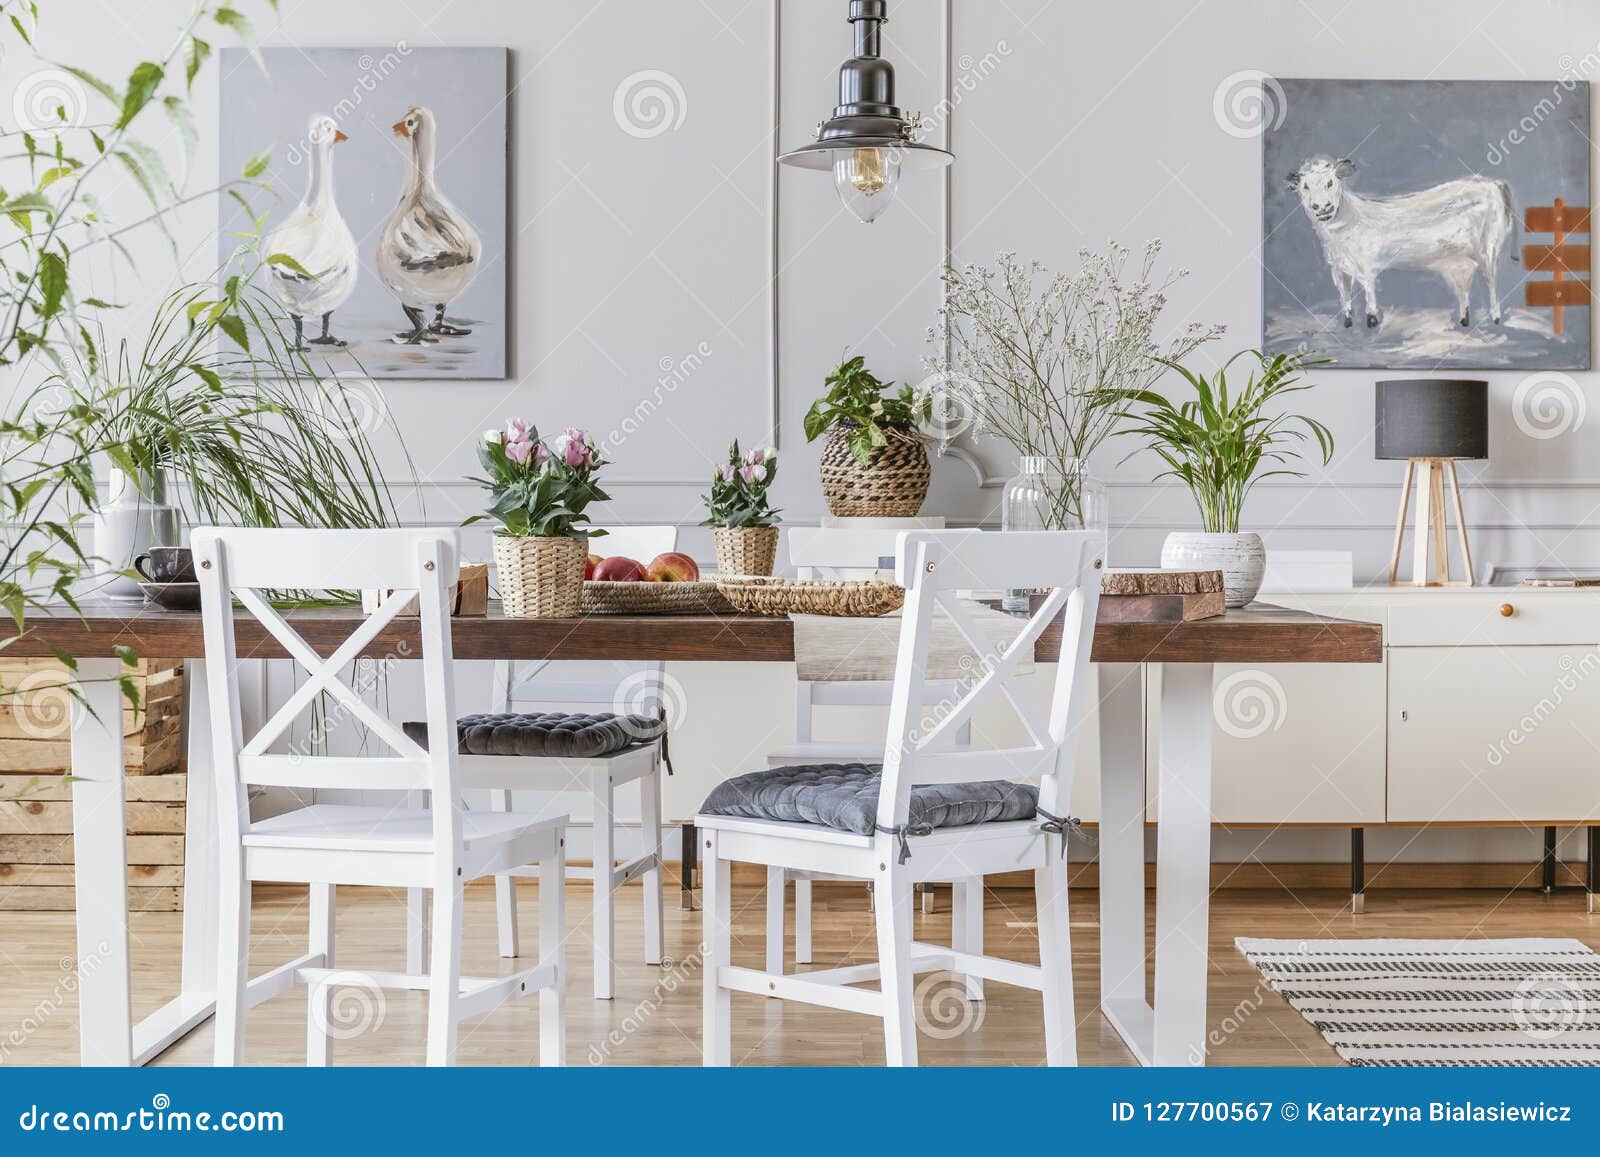 white chairs at wooden table with flowers in eclectic dining room interior with posters. real photo